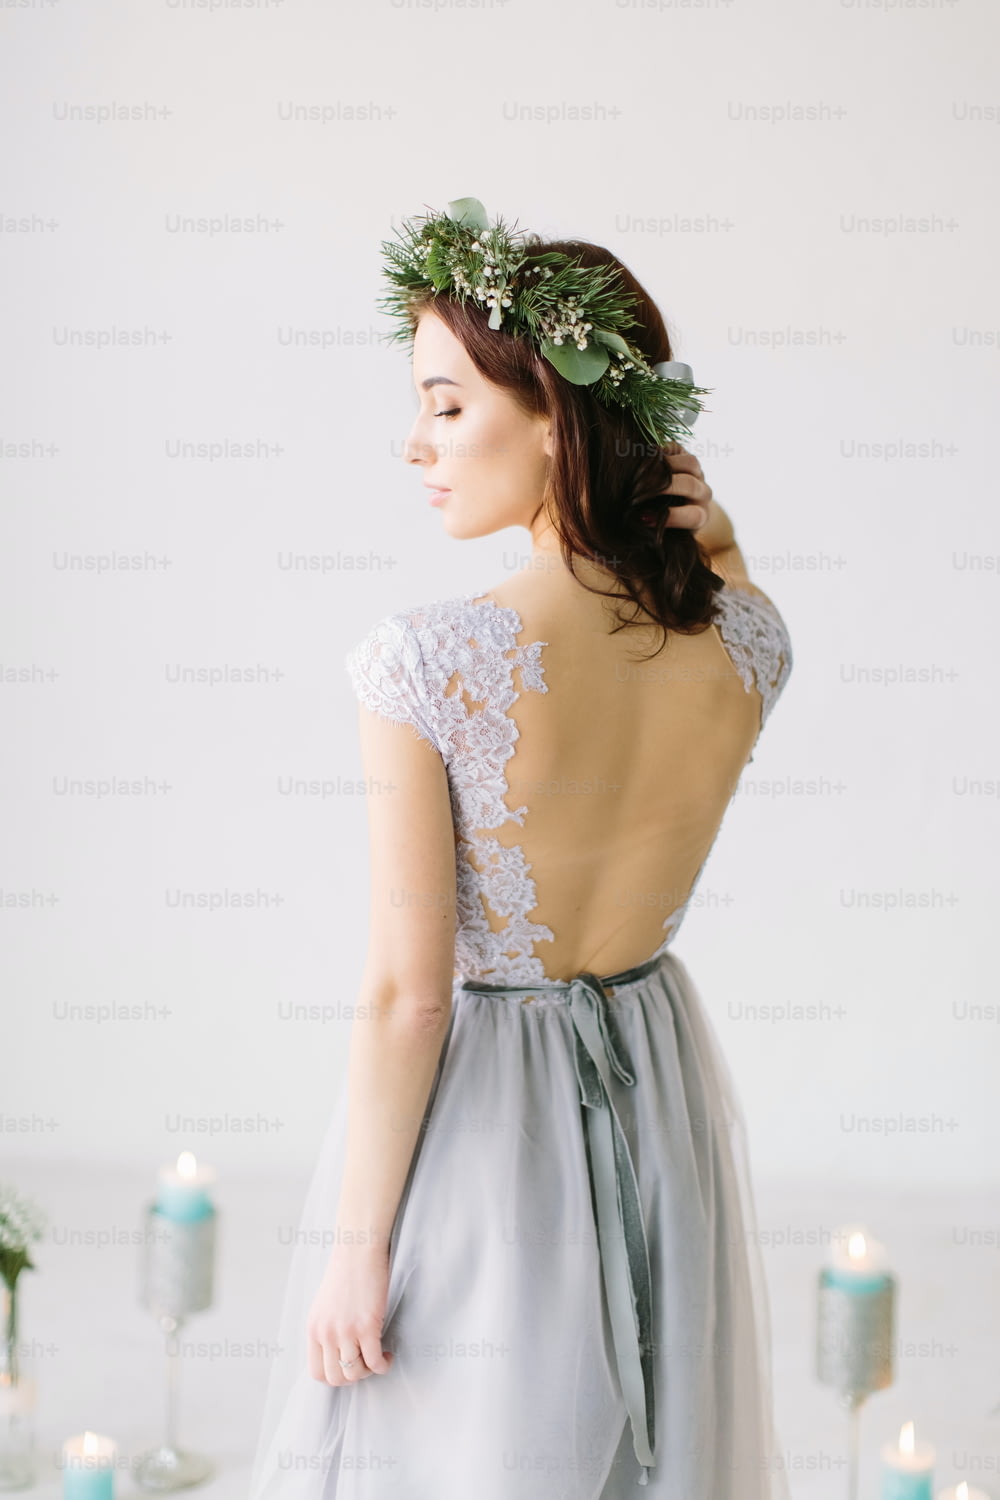 Beautiful young girl in a gray evening dress and a wreath of pine and eucalyptus on her head poses on the background of wedding scenery. Bridesmade poses in the studio before wedding ceremony.